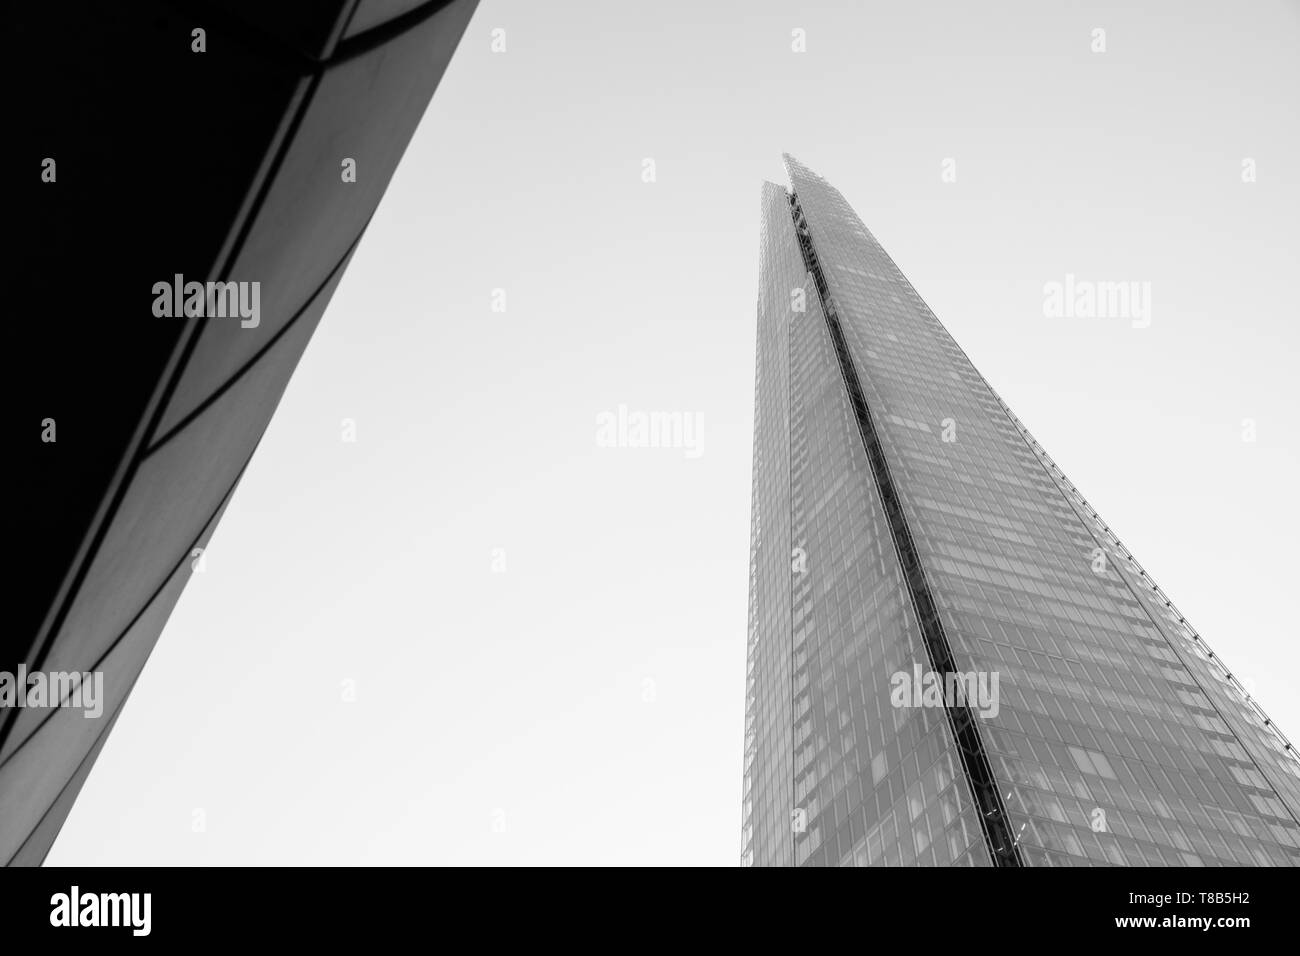 High rise building, The Shard, London, England, Great Britain, Europe Stock Photo